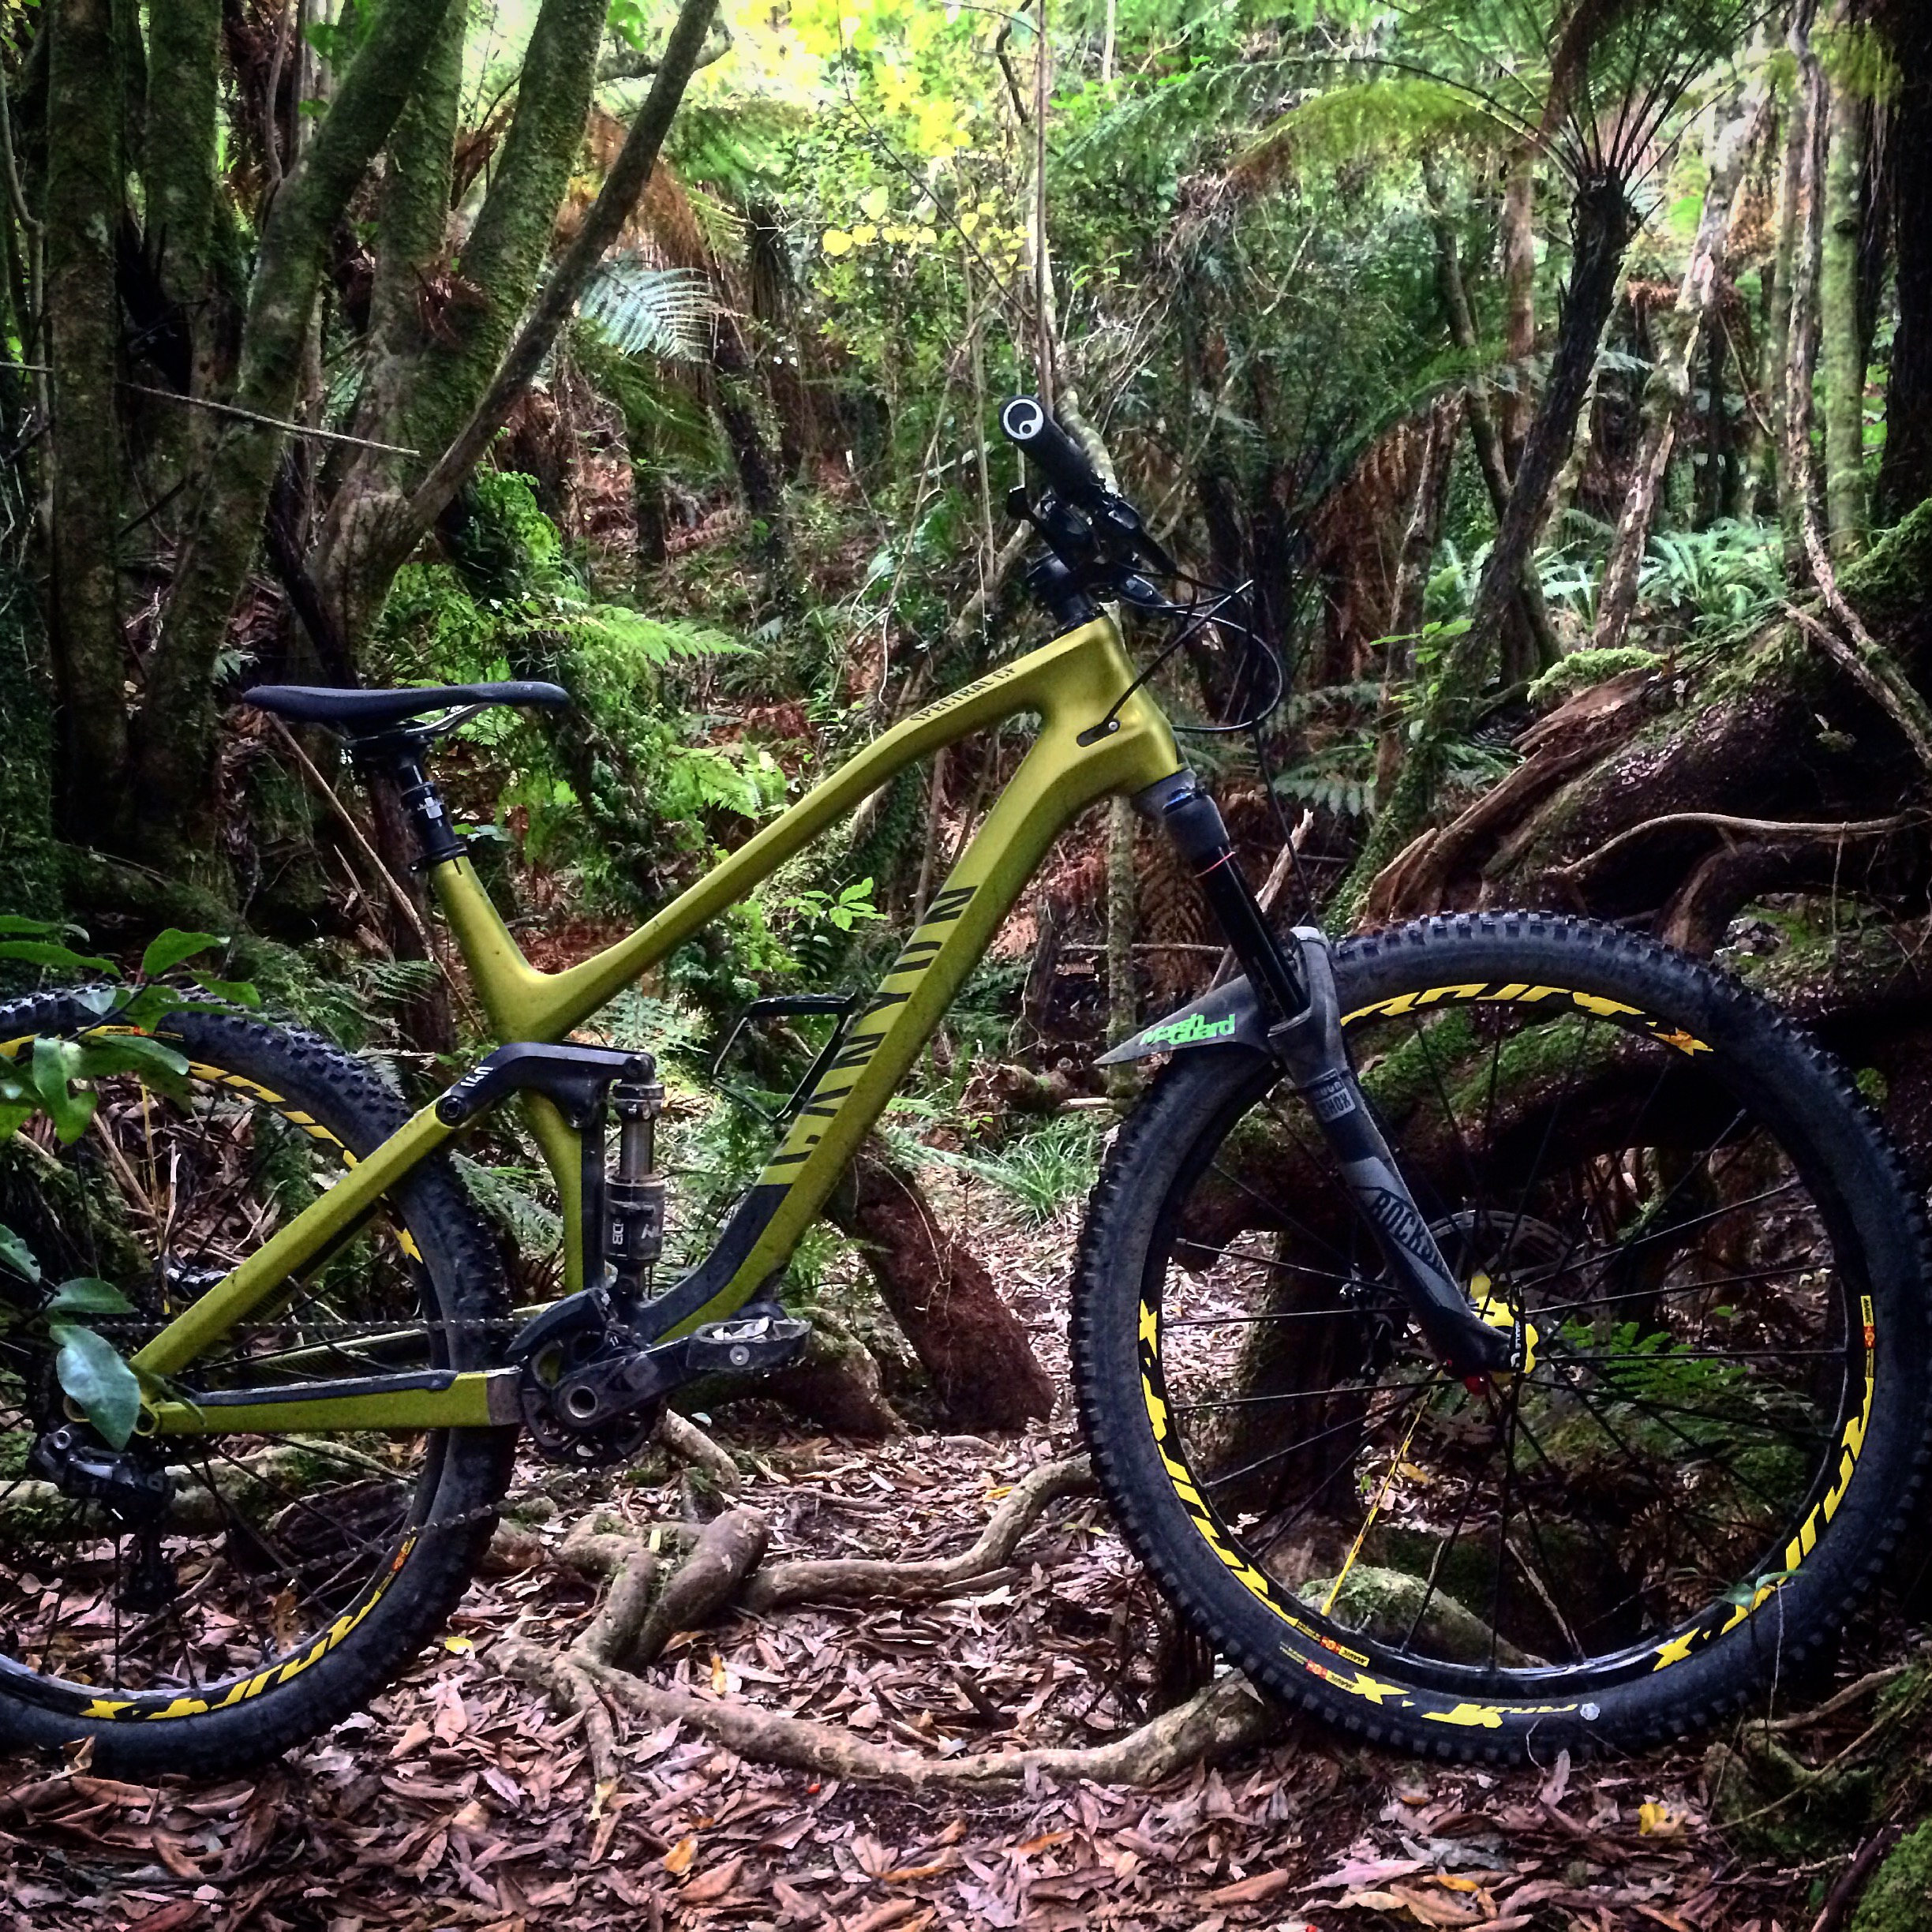 Here's the Spectral CF in its natural habitat, the Akatarawa jungle out the back of my place. First impressions are a nimble and aggressive trail bike that can be pushed hard in any conditions.